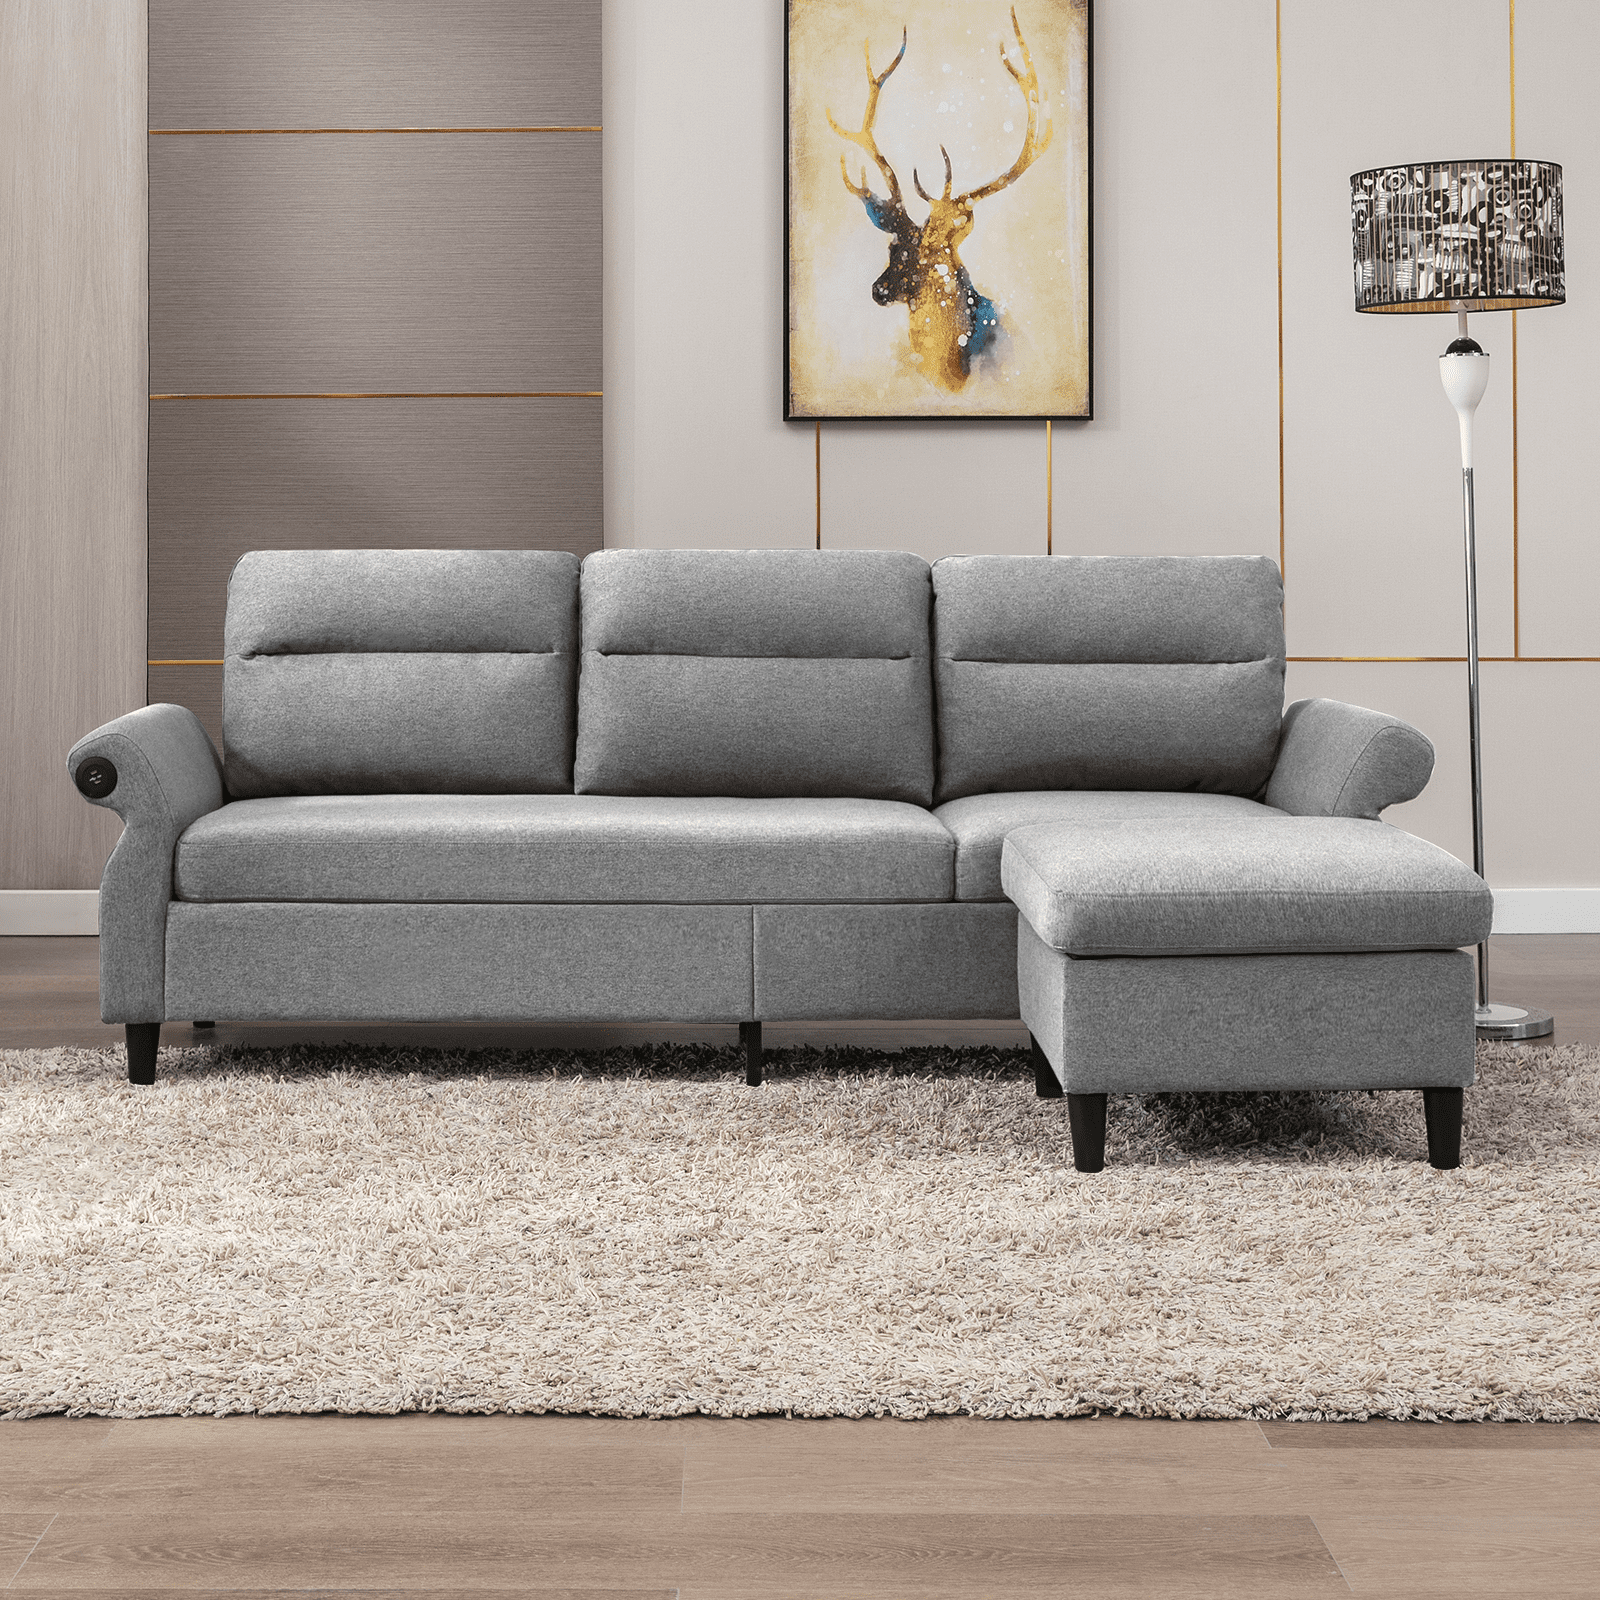 Muzz Convertible Sectional Sofa Couch, 3 Seat L Shape Sofa Couch With 2 Usb  Ports And Adjustable Armrest, Small Reversible Sectional Couches With  Ottoman For Living Room, Apartment, Light Grey – Walmart Regarding 3 Seat Convertible Sectional Sofas (View 15 of 15)